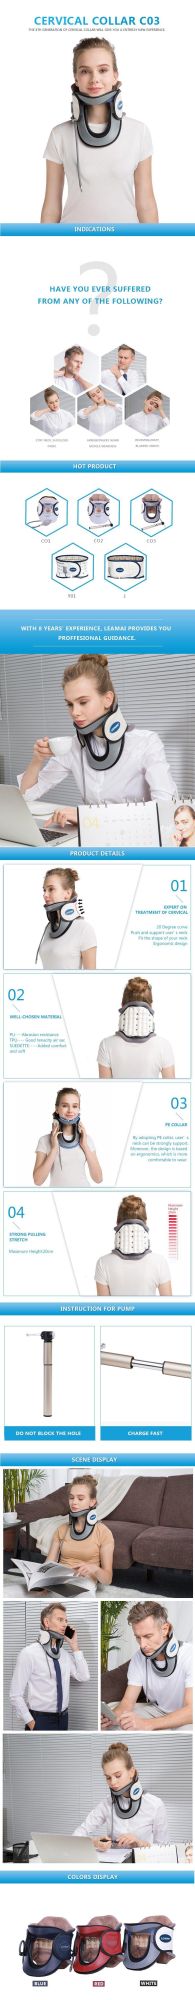 Air Neck Traction Relive Pain Cervical Neck Traction Device